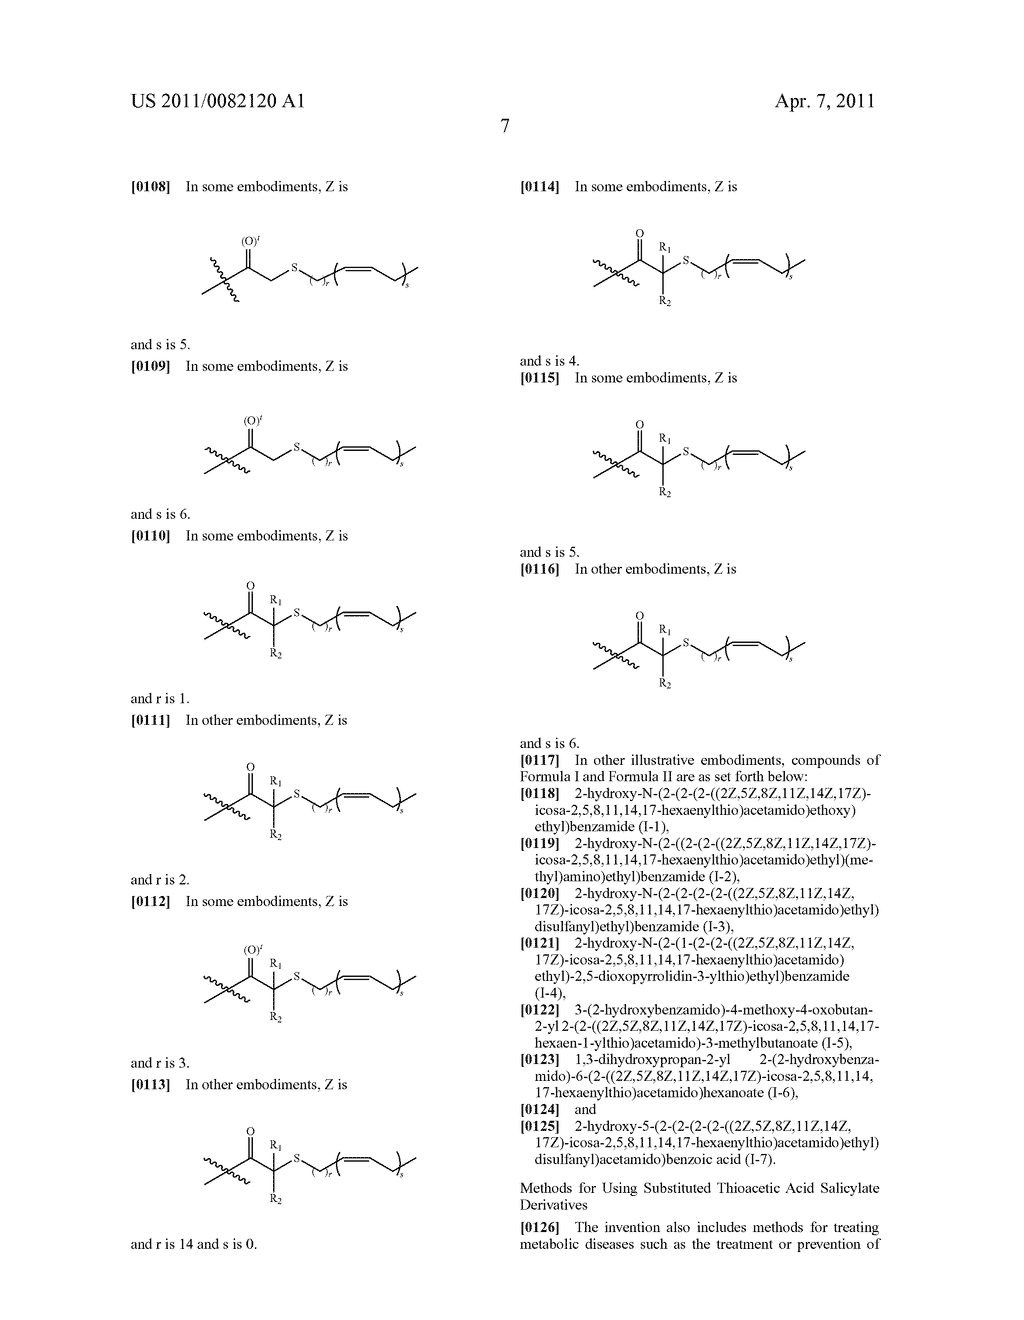 SUBSTITUTED THIOACETIC ACID SALICYLATE DERIVATIVES AND THEIR USES - diagram, schematic, and image 08